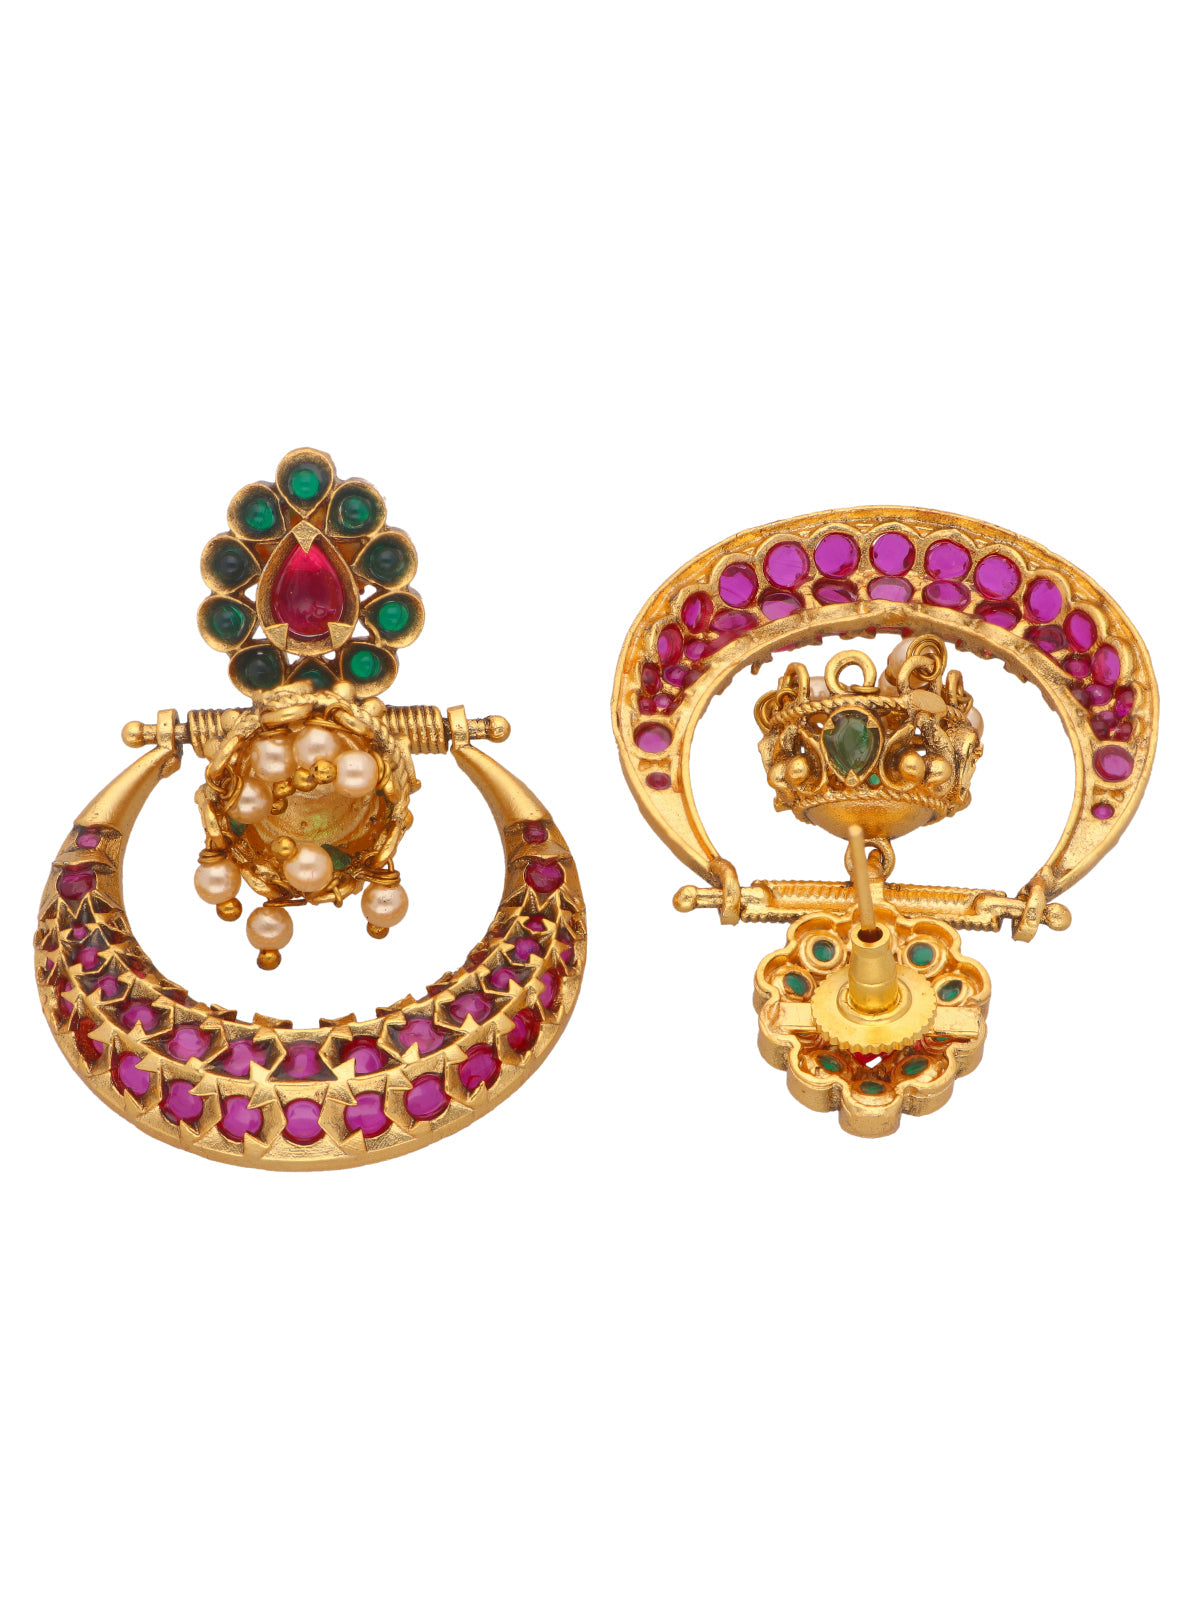 22k Gold Plated Gift Wedding Earrings Indian 3